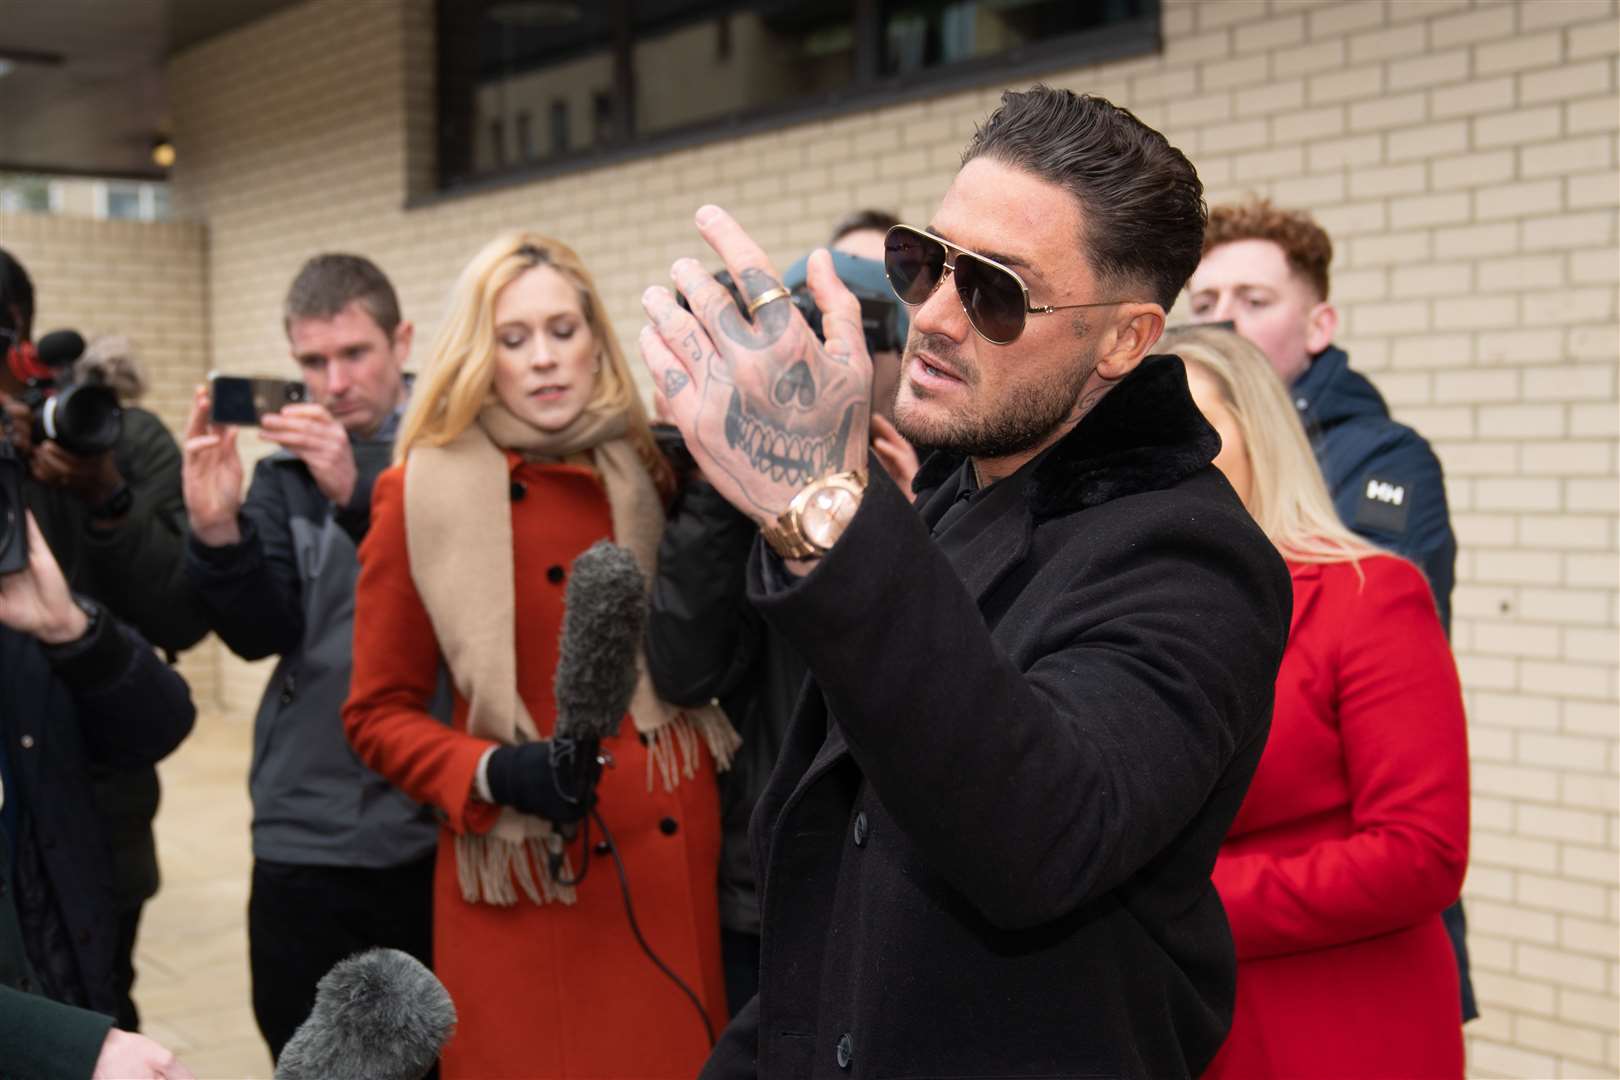 Stephen Bear was jailed for sharing the video without Georgia Harrison’s consent (PA)